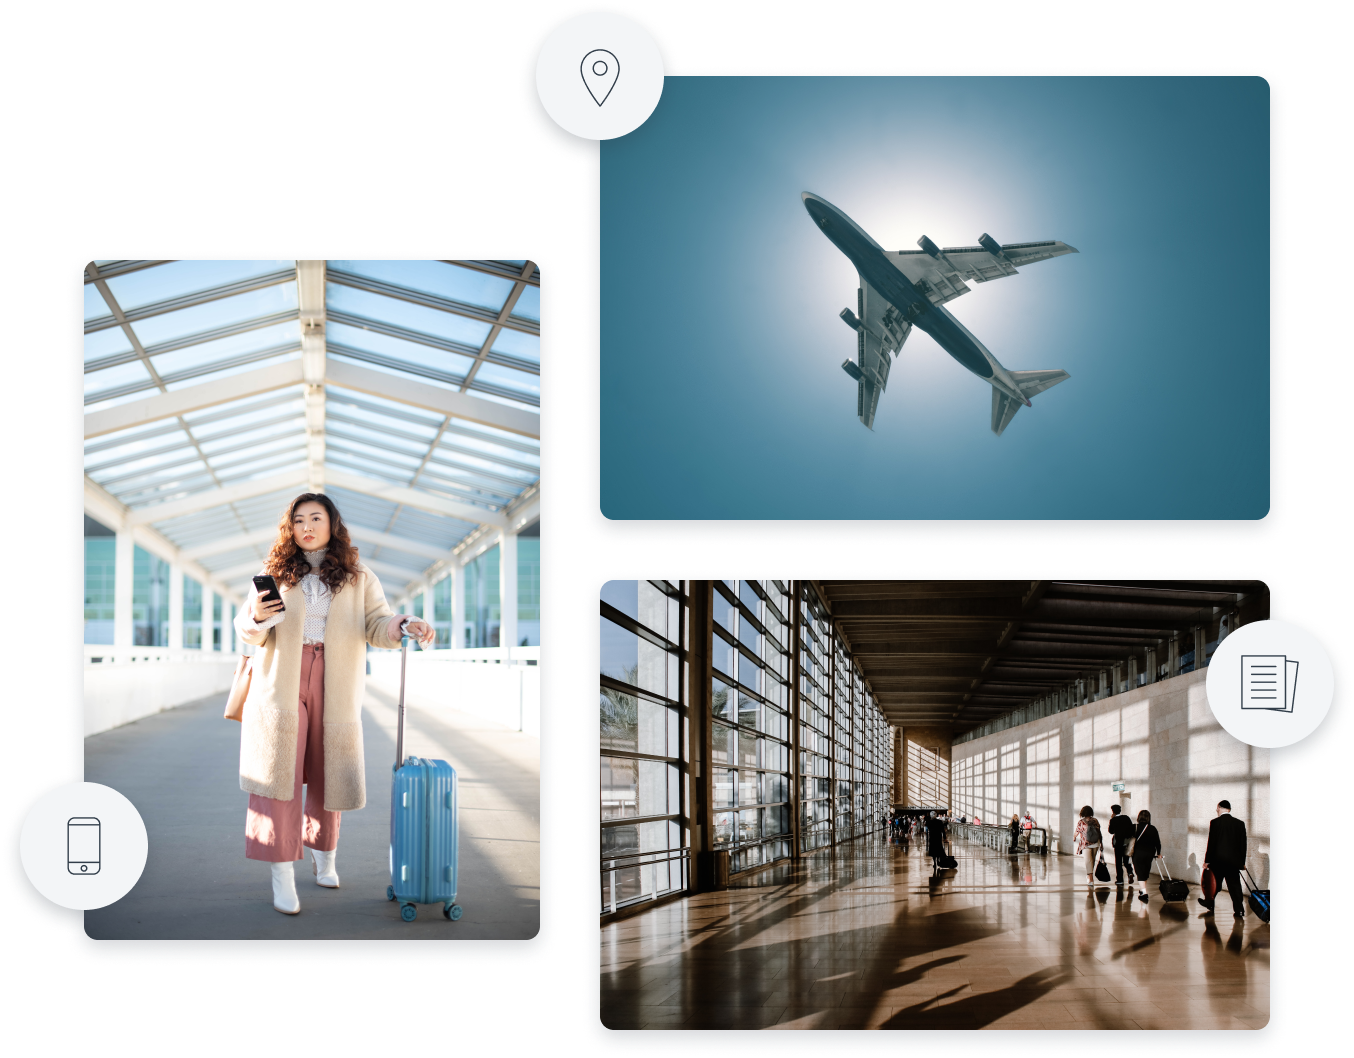 Photos of airport, airplane, and woman with suitcase